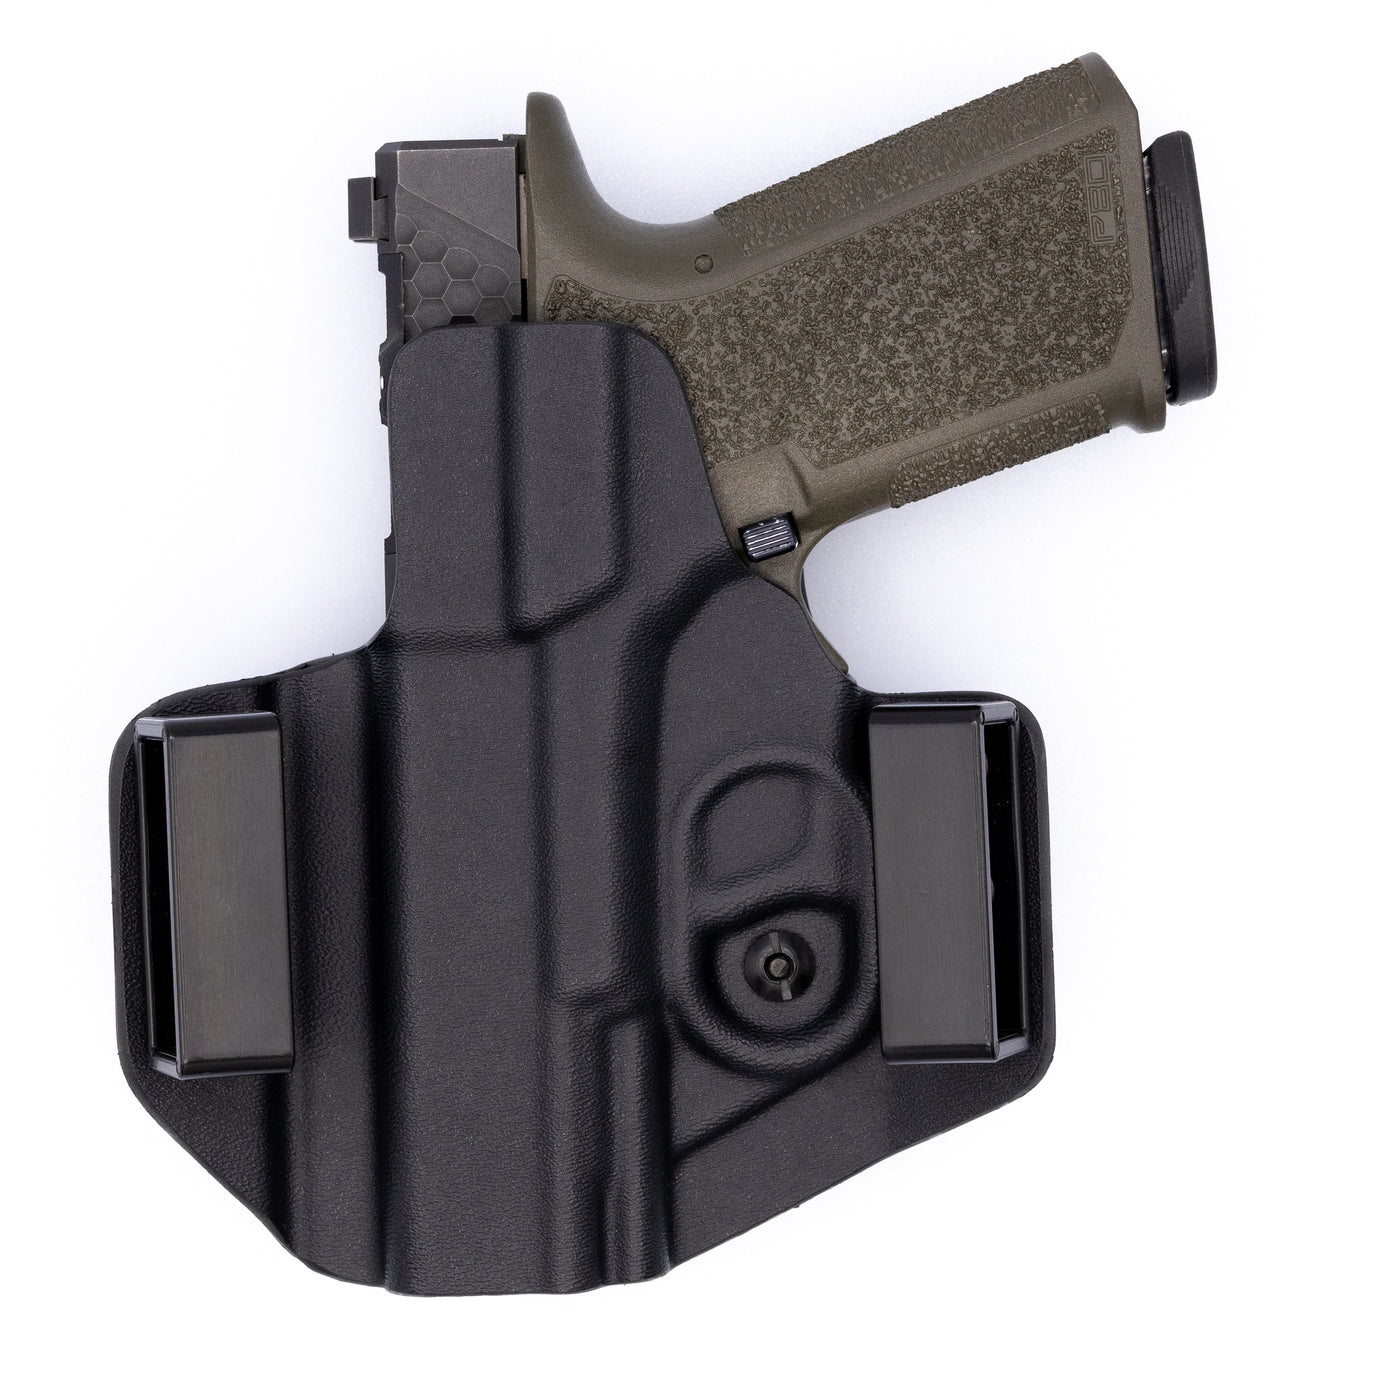 C&G Holsters OWB Outside the waistband Holster for the Polymer80 Poly80 PF9/40v2 PF9/40c in holstered position rear view